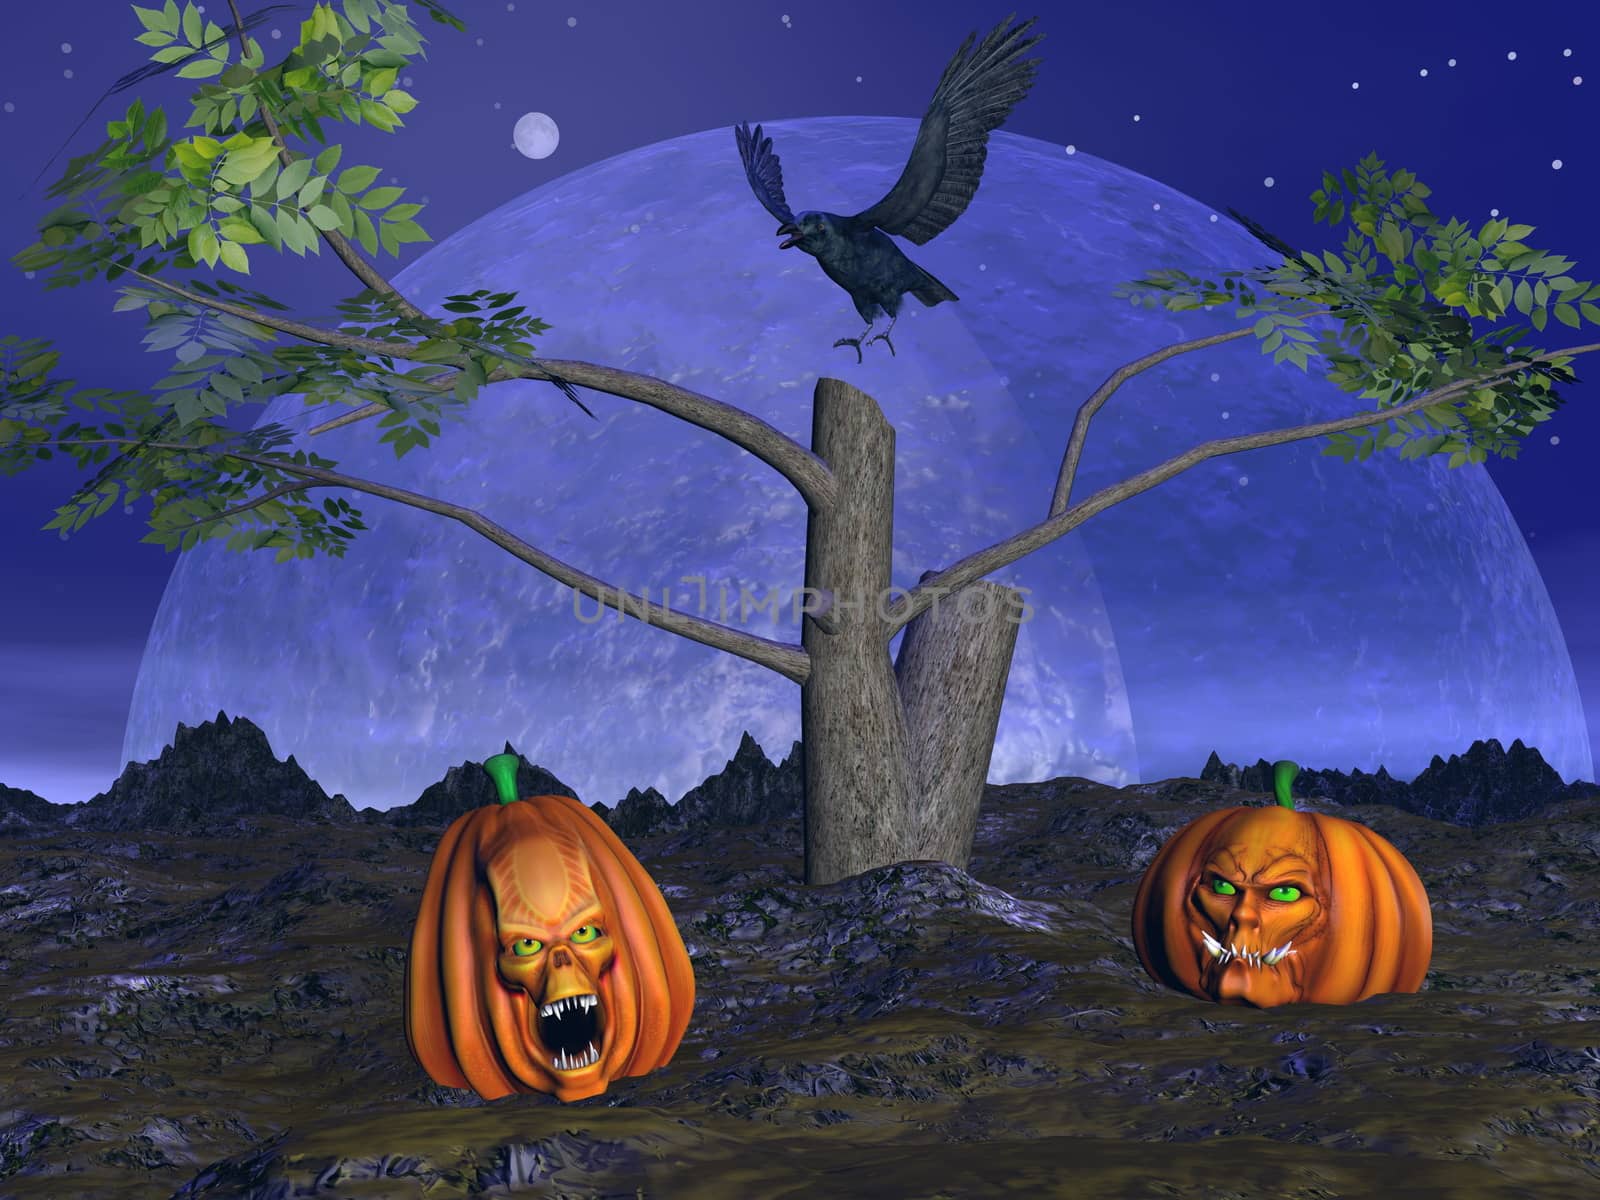 Halloween pumpkins, dead tree and crow raven by night with full moon - 3D render